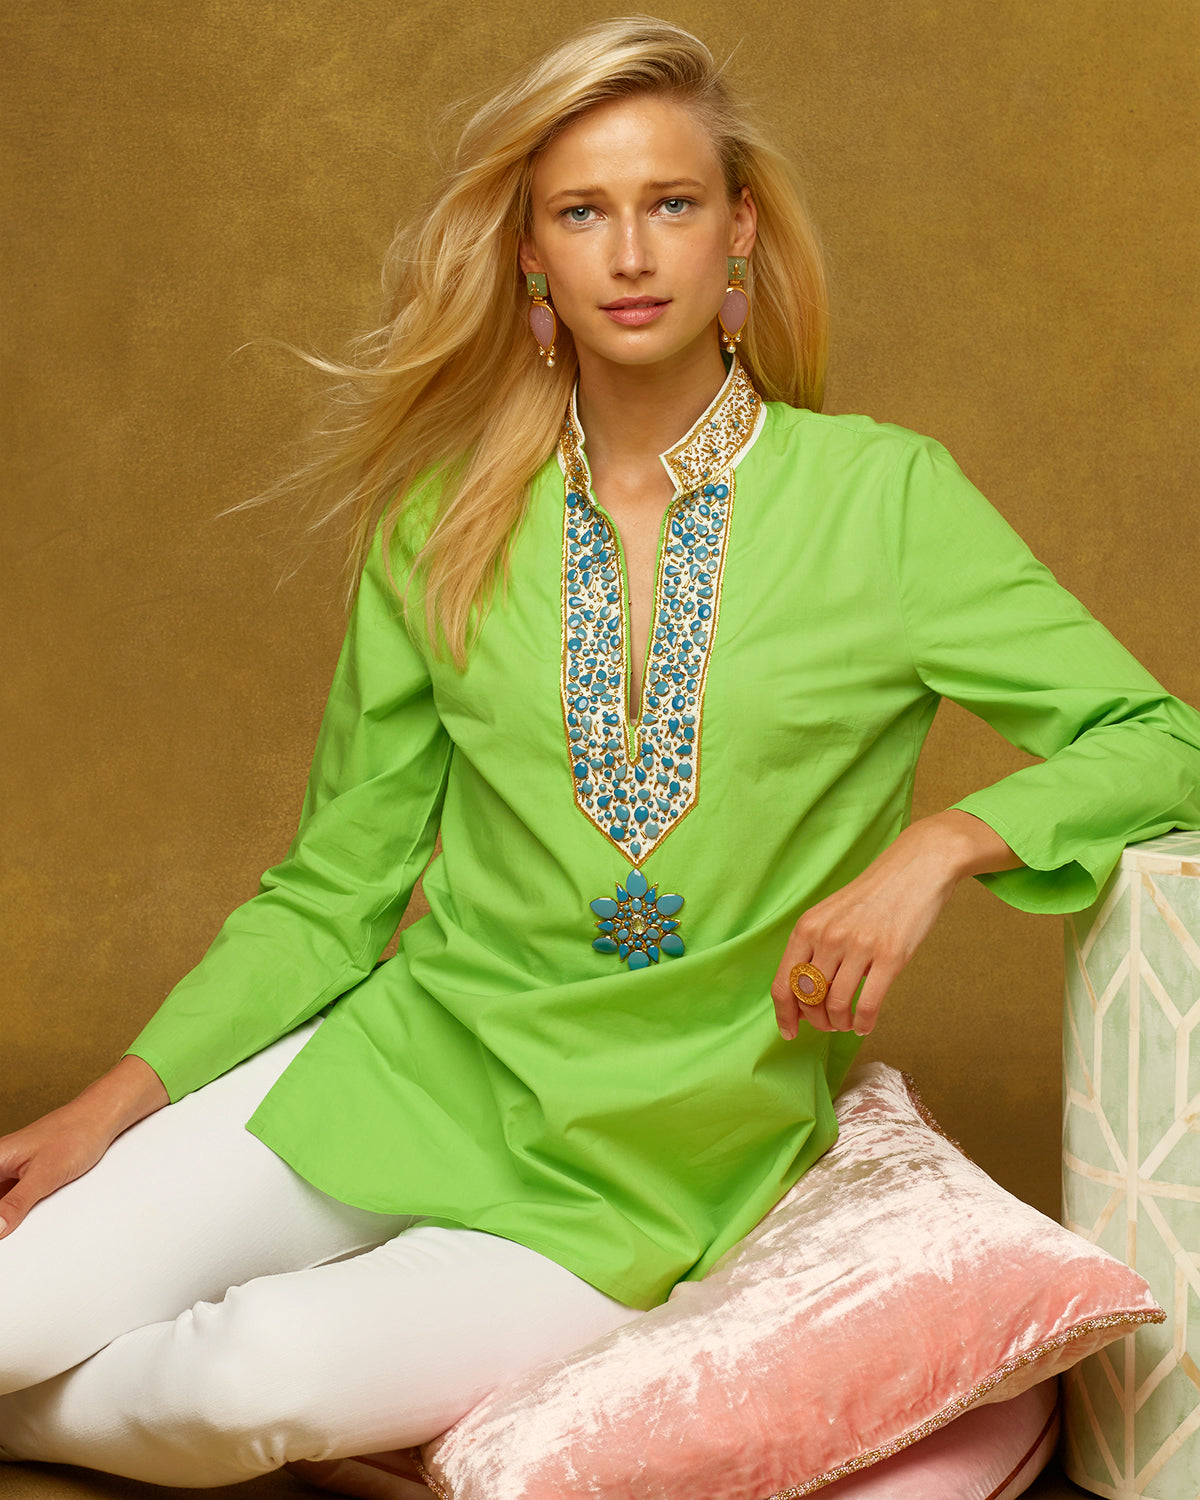 Madison Tunic in Lime Green Embellished in Gold and Semiprecious Stones